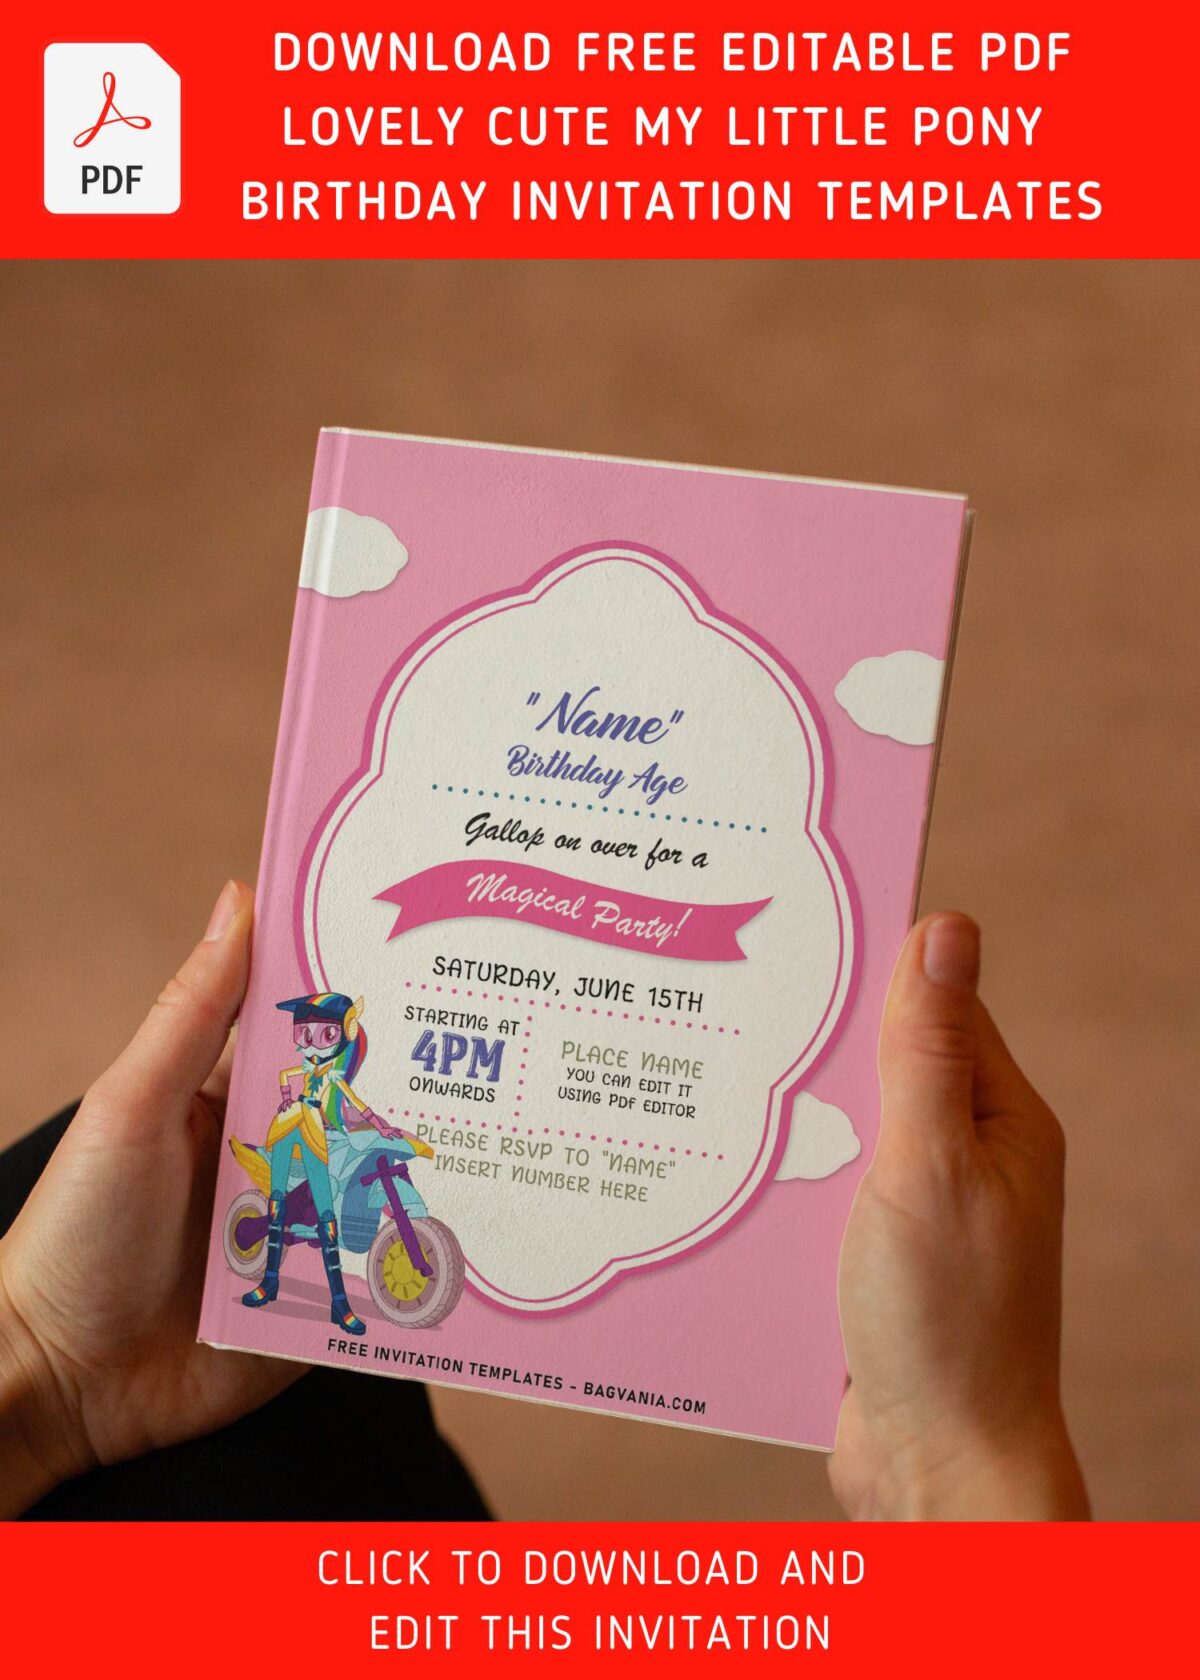 (Free Editable PDF) Lovely Cute My Little Pony Birthday Invitation Templates with cute text box